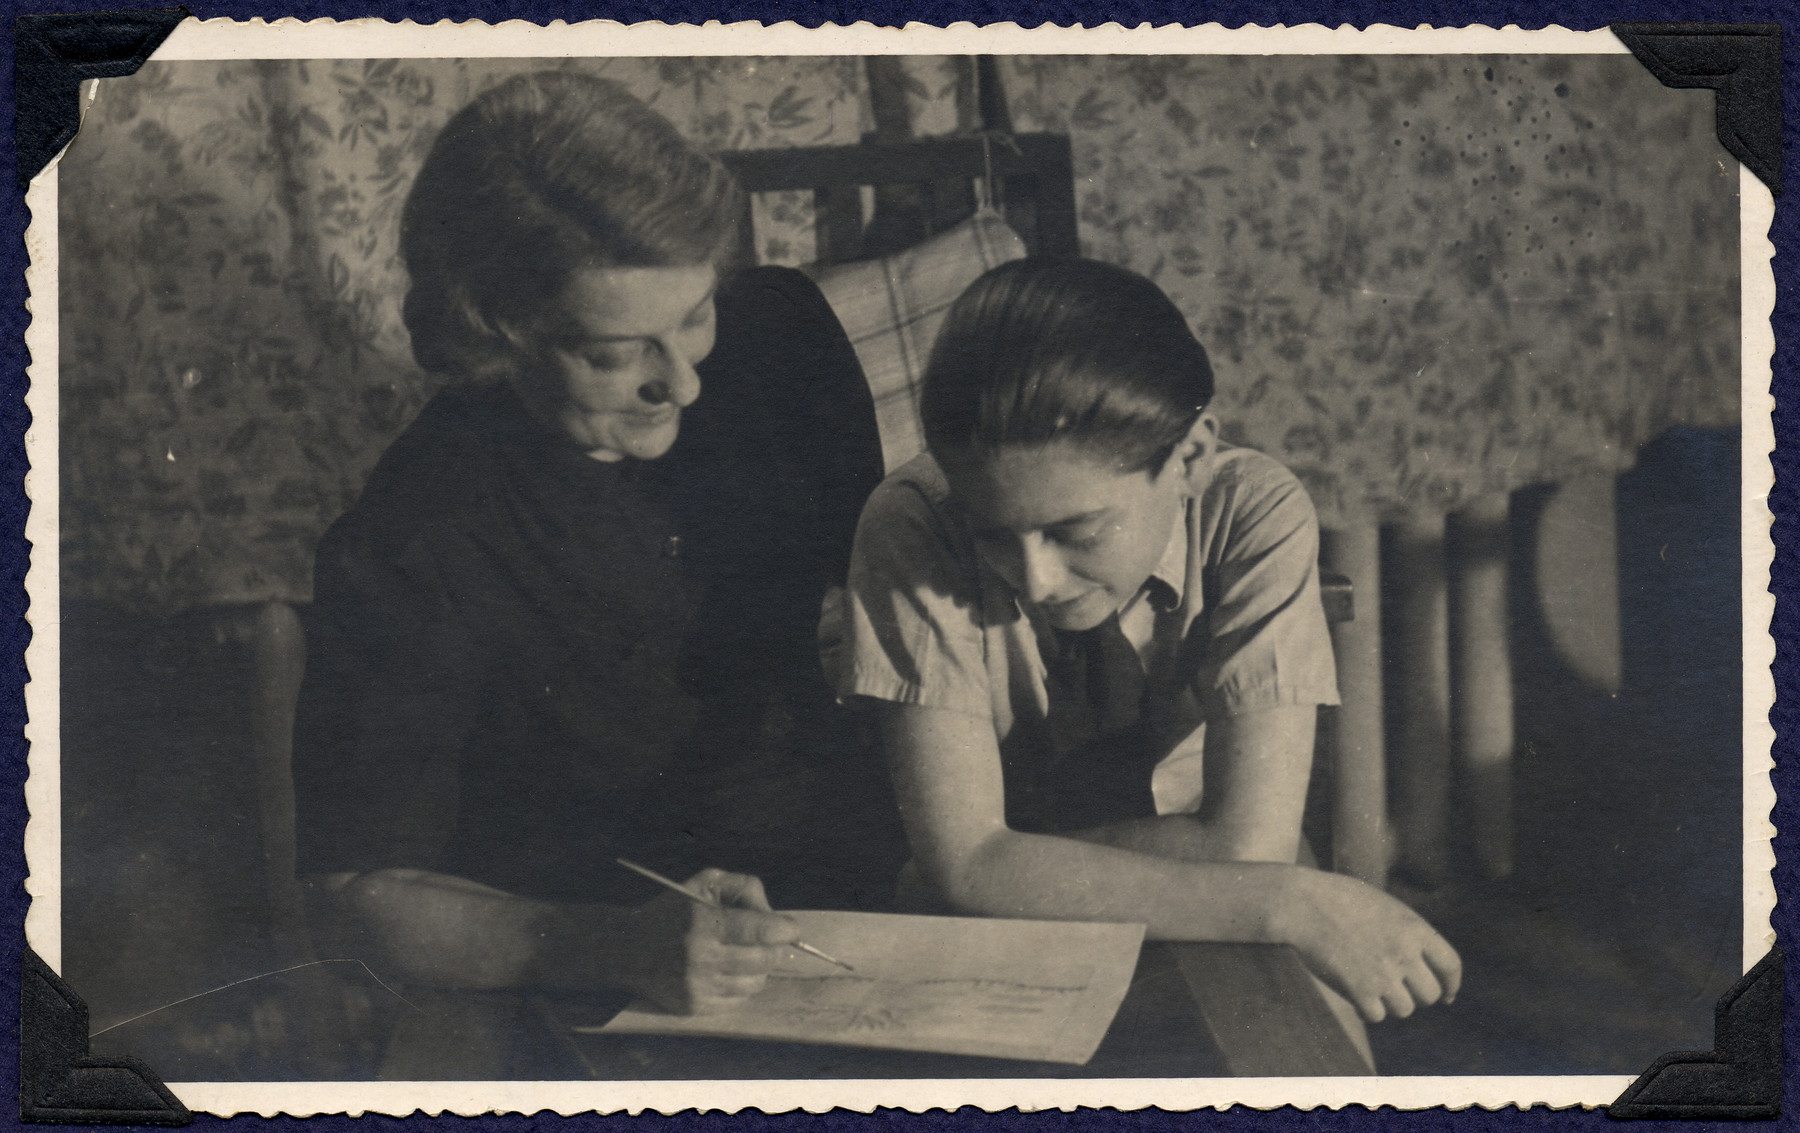 A mother and son, both survivors of Theresienstadt, study a document in their apartment in postwar Prague.

Pictured are Margaret and Michael Grunbaum.